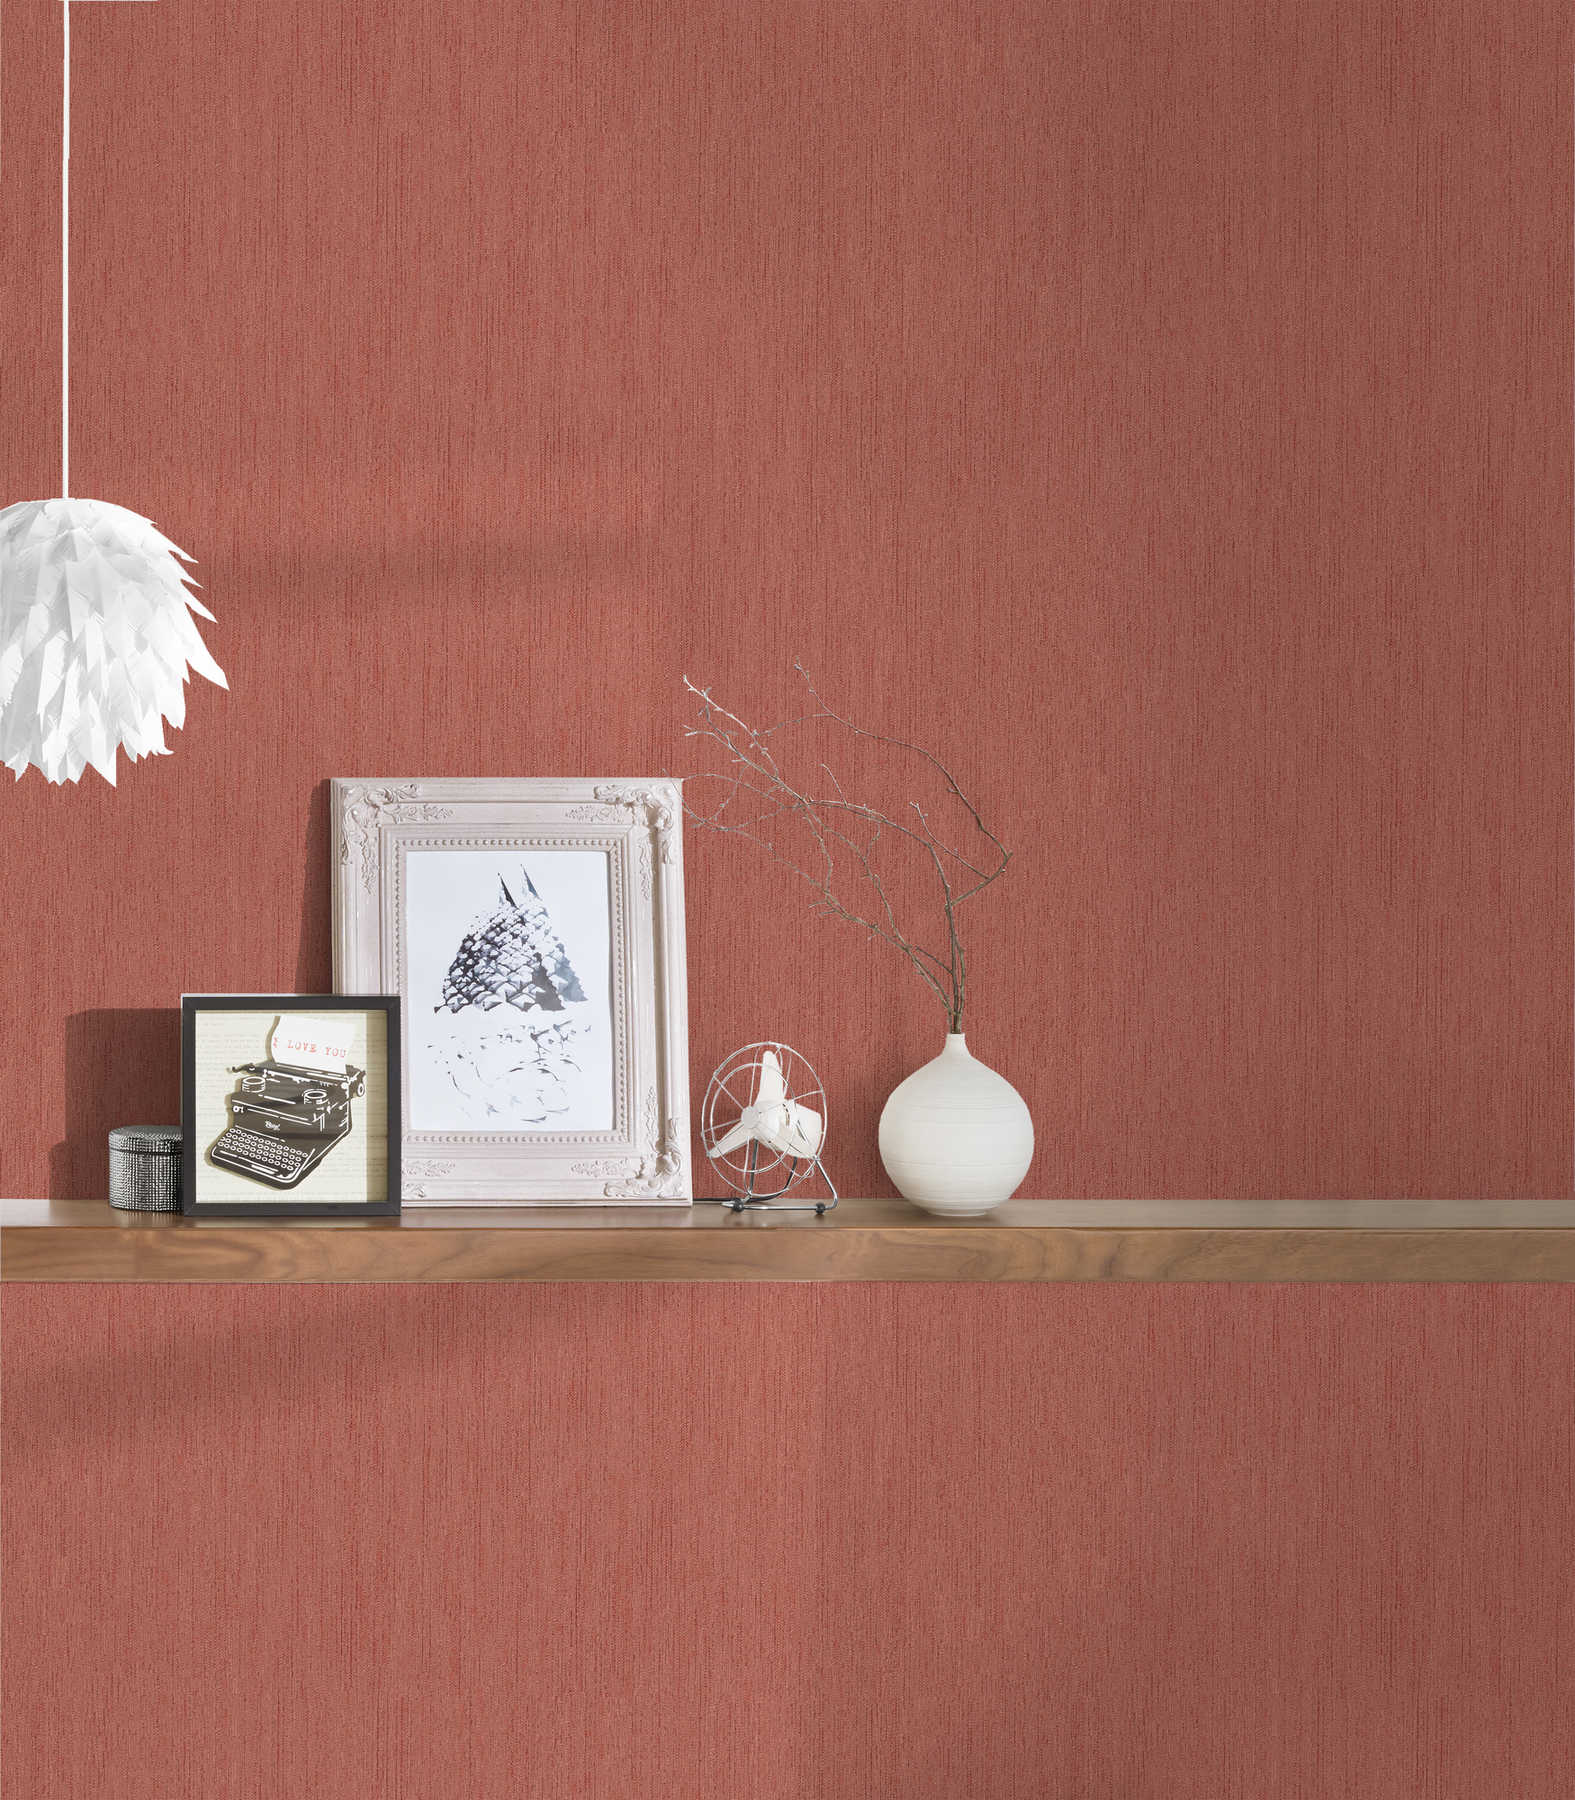             Wallpaper rust red non-woven with structure design - 70cm wide
        